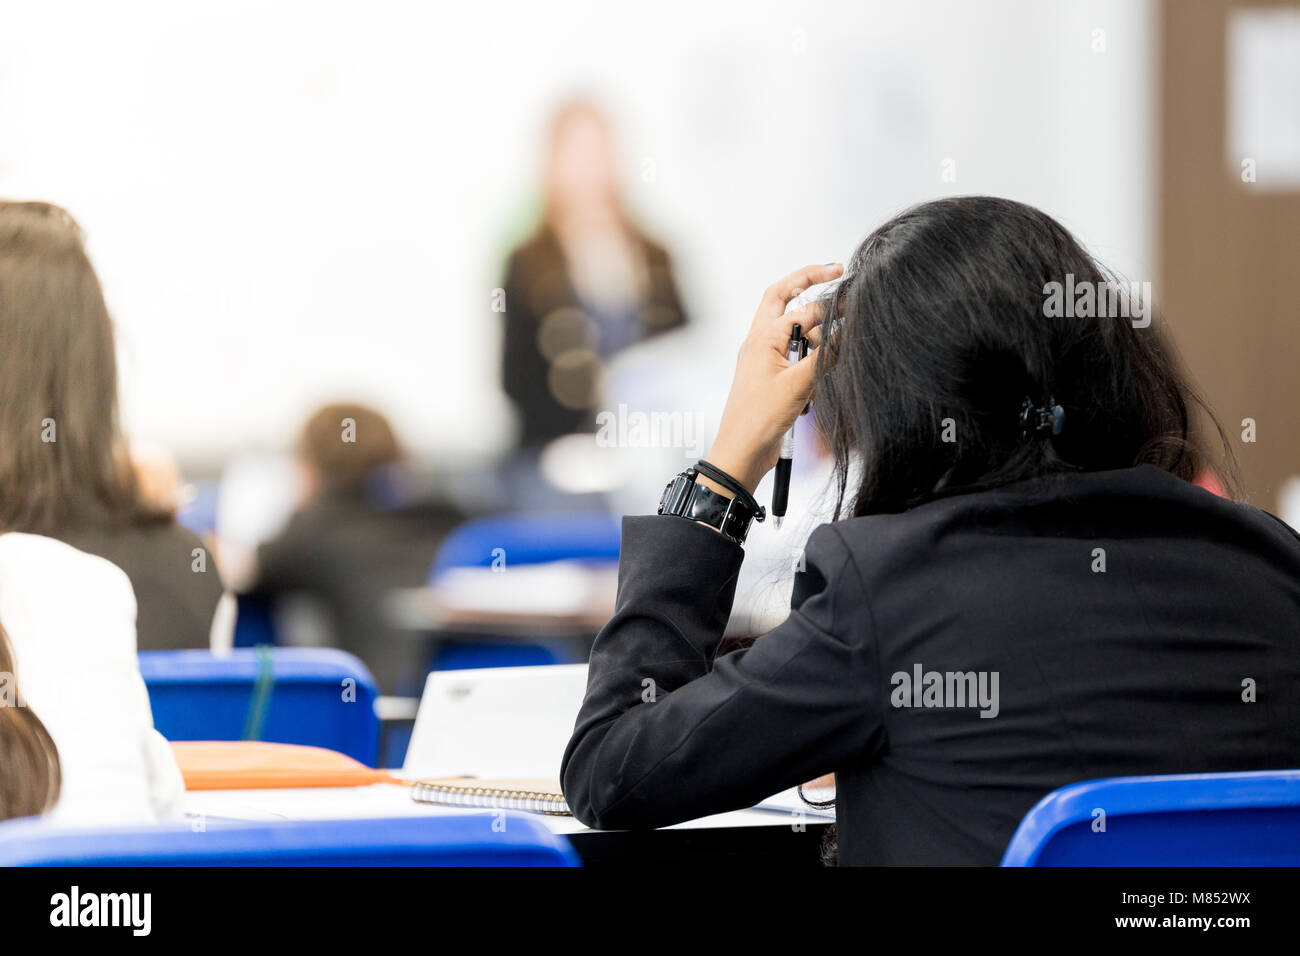 Student studying hard in class Stock Photo